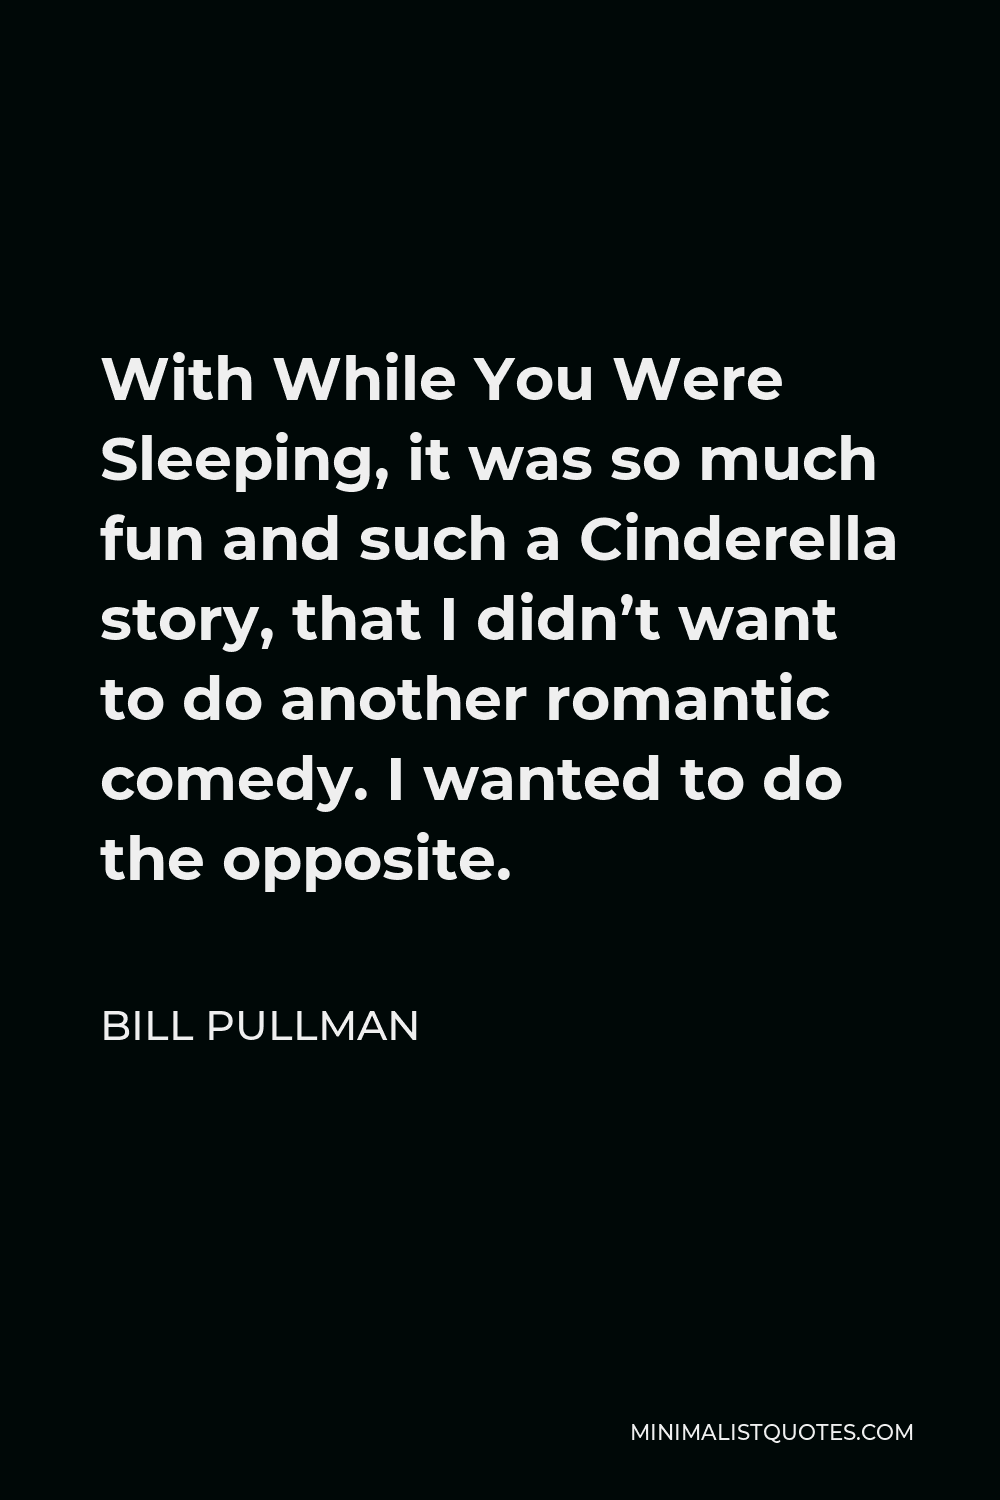 Bill Pullman Quote - With While You Were Sleeping, it was so much fun and such a Cinderella story, that I didn’t want to do another romantic comedy. I wanted to do the opposite.